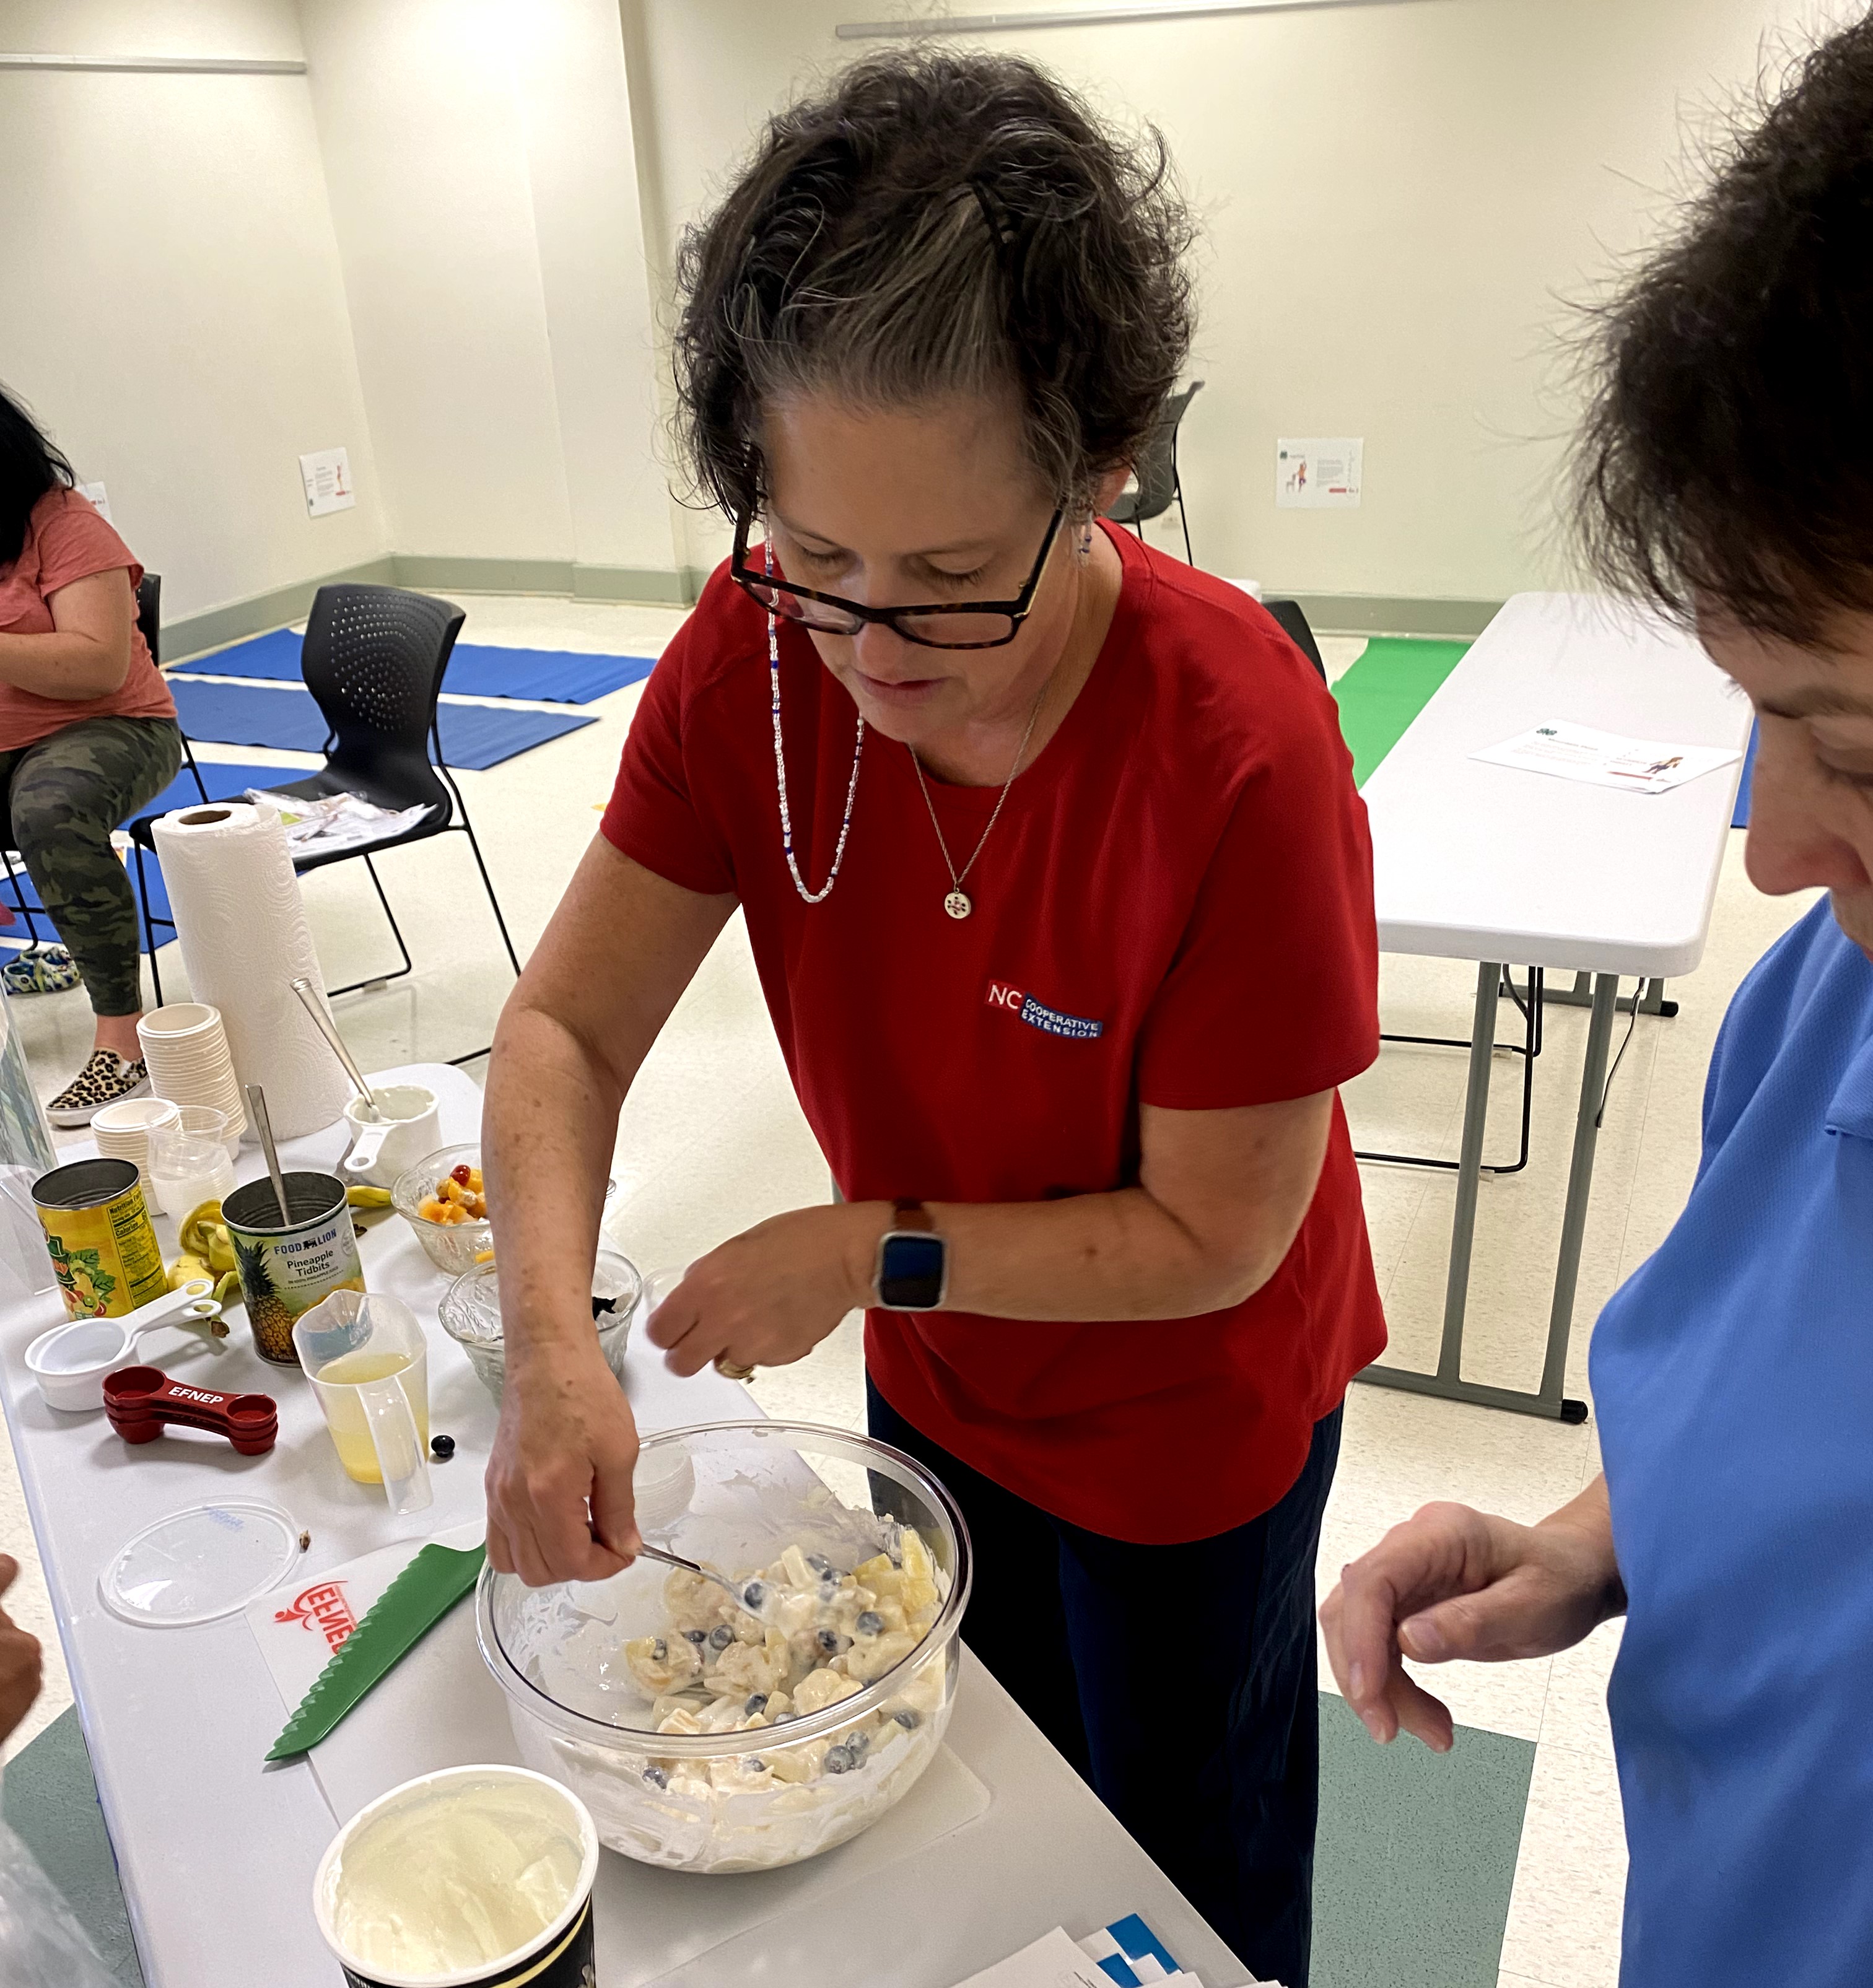 staff and participant stirring food for cooking activity